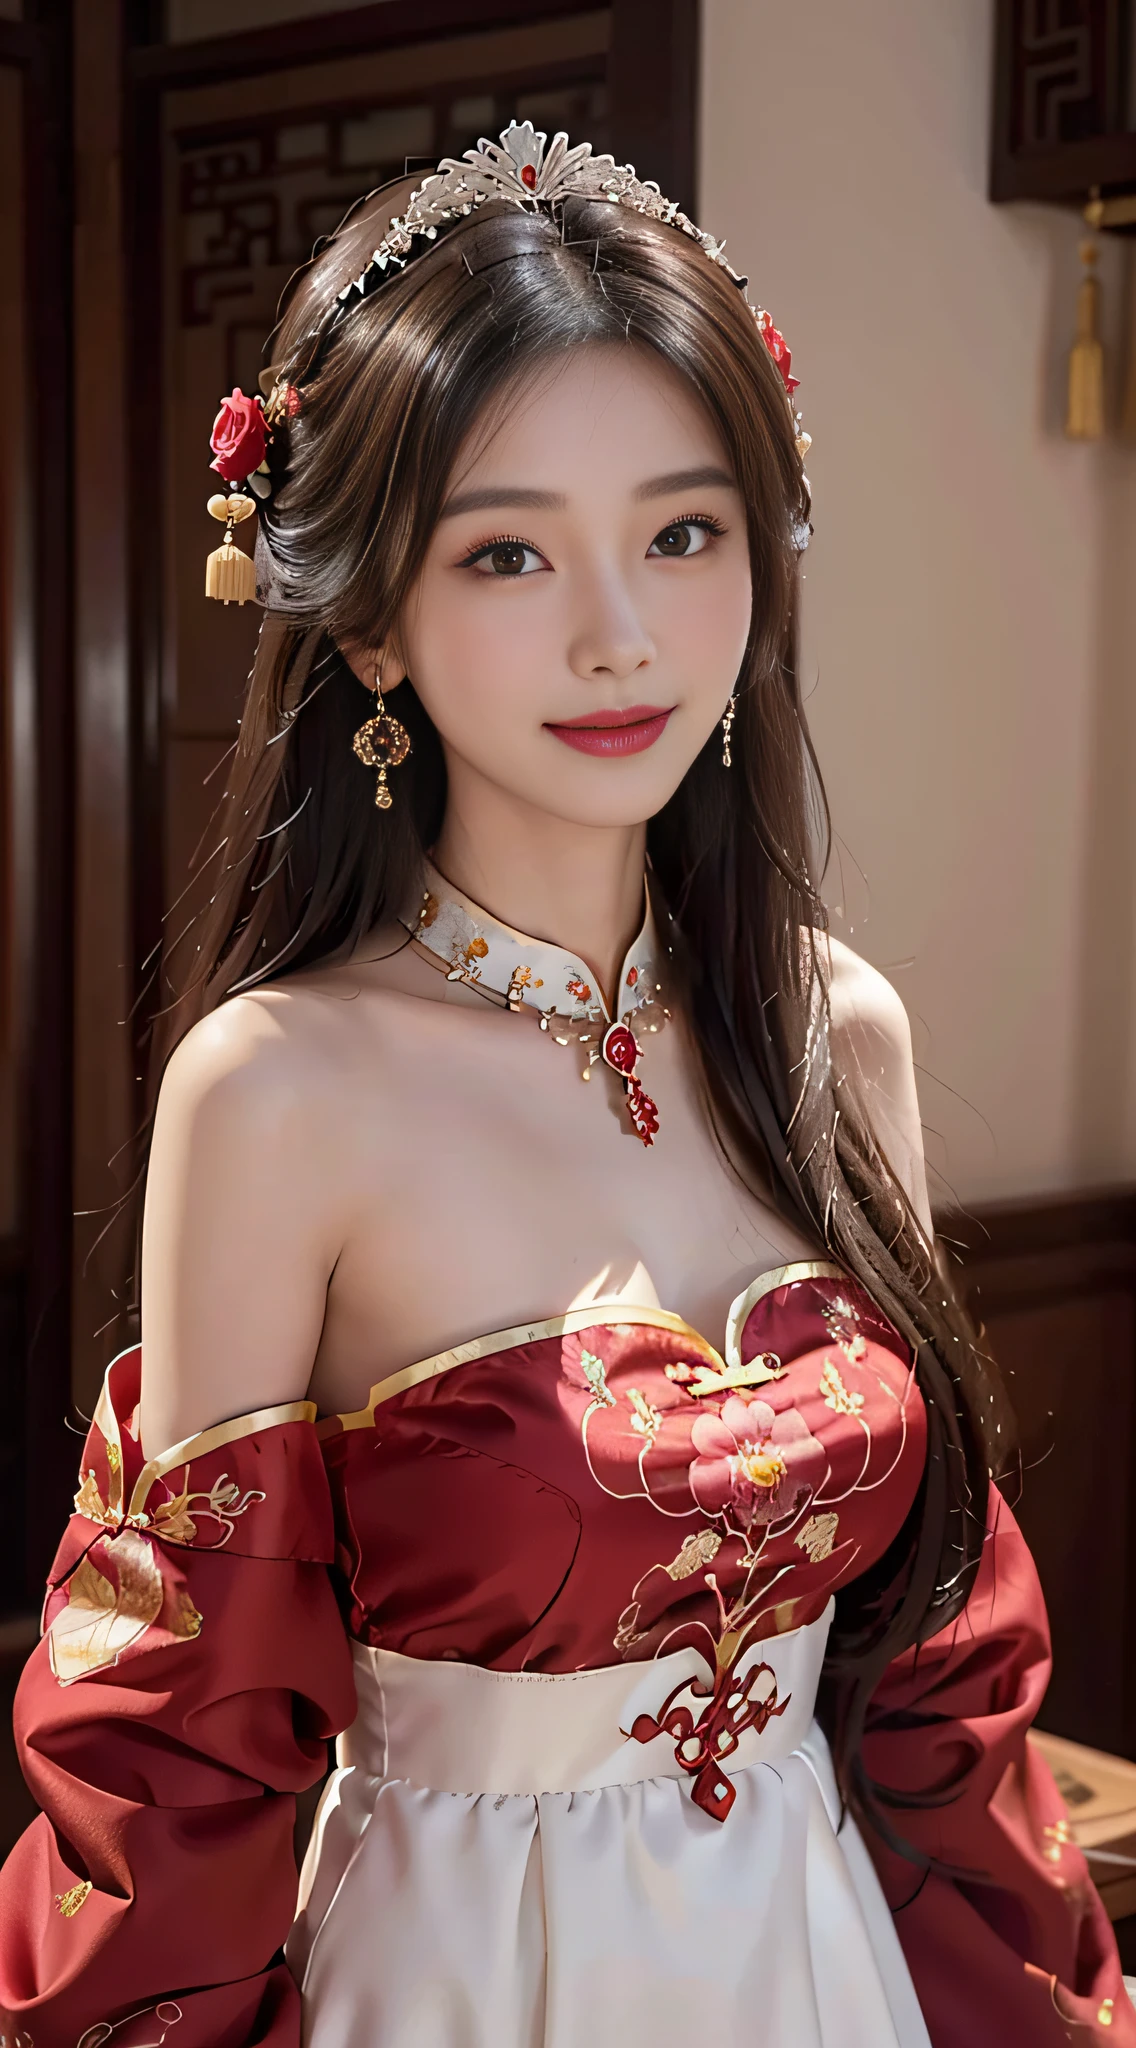 A beautyful girl，long whitr hair，(Wear a beautiful red Chinese dress)，Chinese stand collar，Exquisite embroidery，(A delicate crown was worn over his hair)，A pair of shiny earrings hang from the ears，A beautiful necklace was worn around his neck，Sweet smiling，His face flushed，ssmile，Flowers in hand